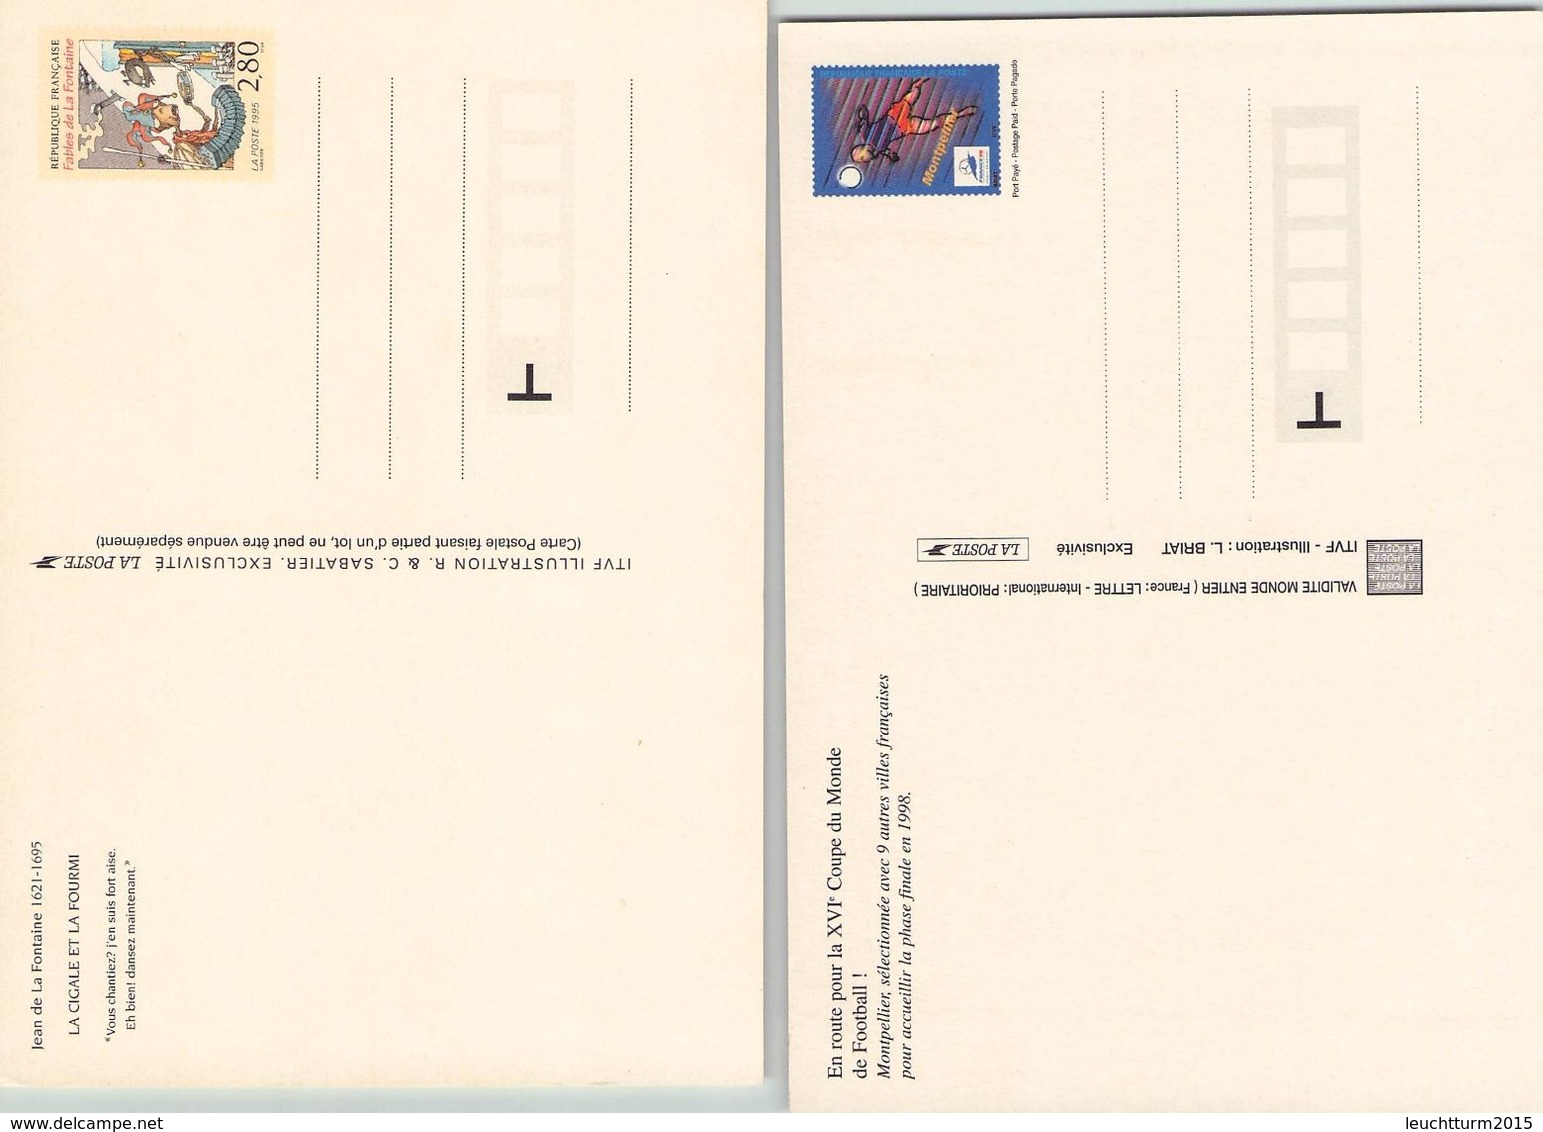 FRANCE - COLLECTION STATIONARY Not Used //101 - Lots Et Collections : Entiers Et PAP